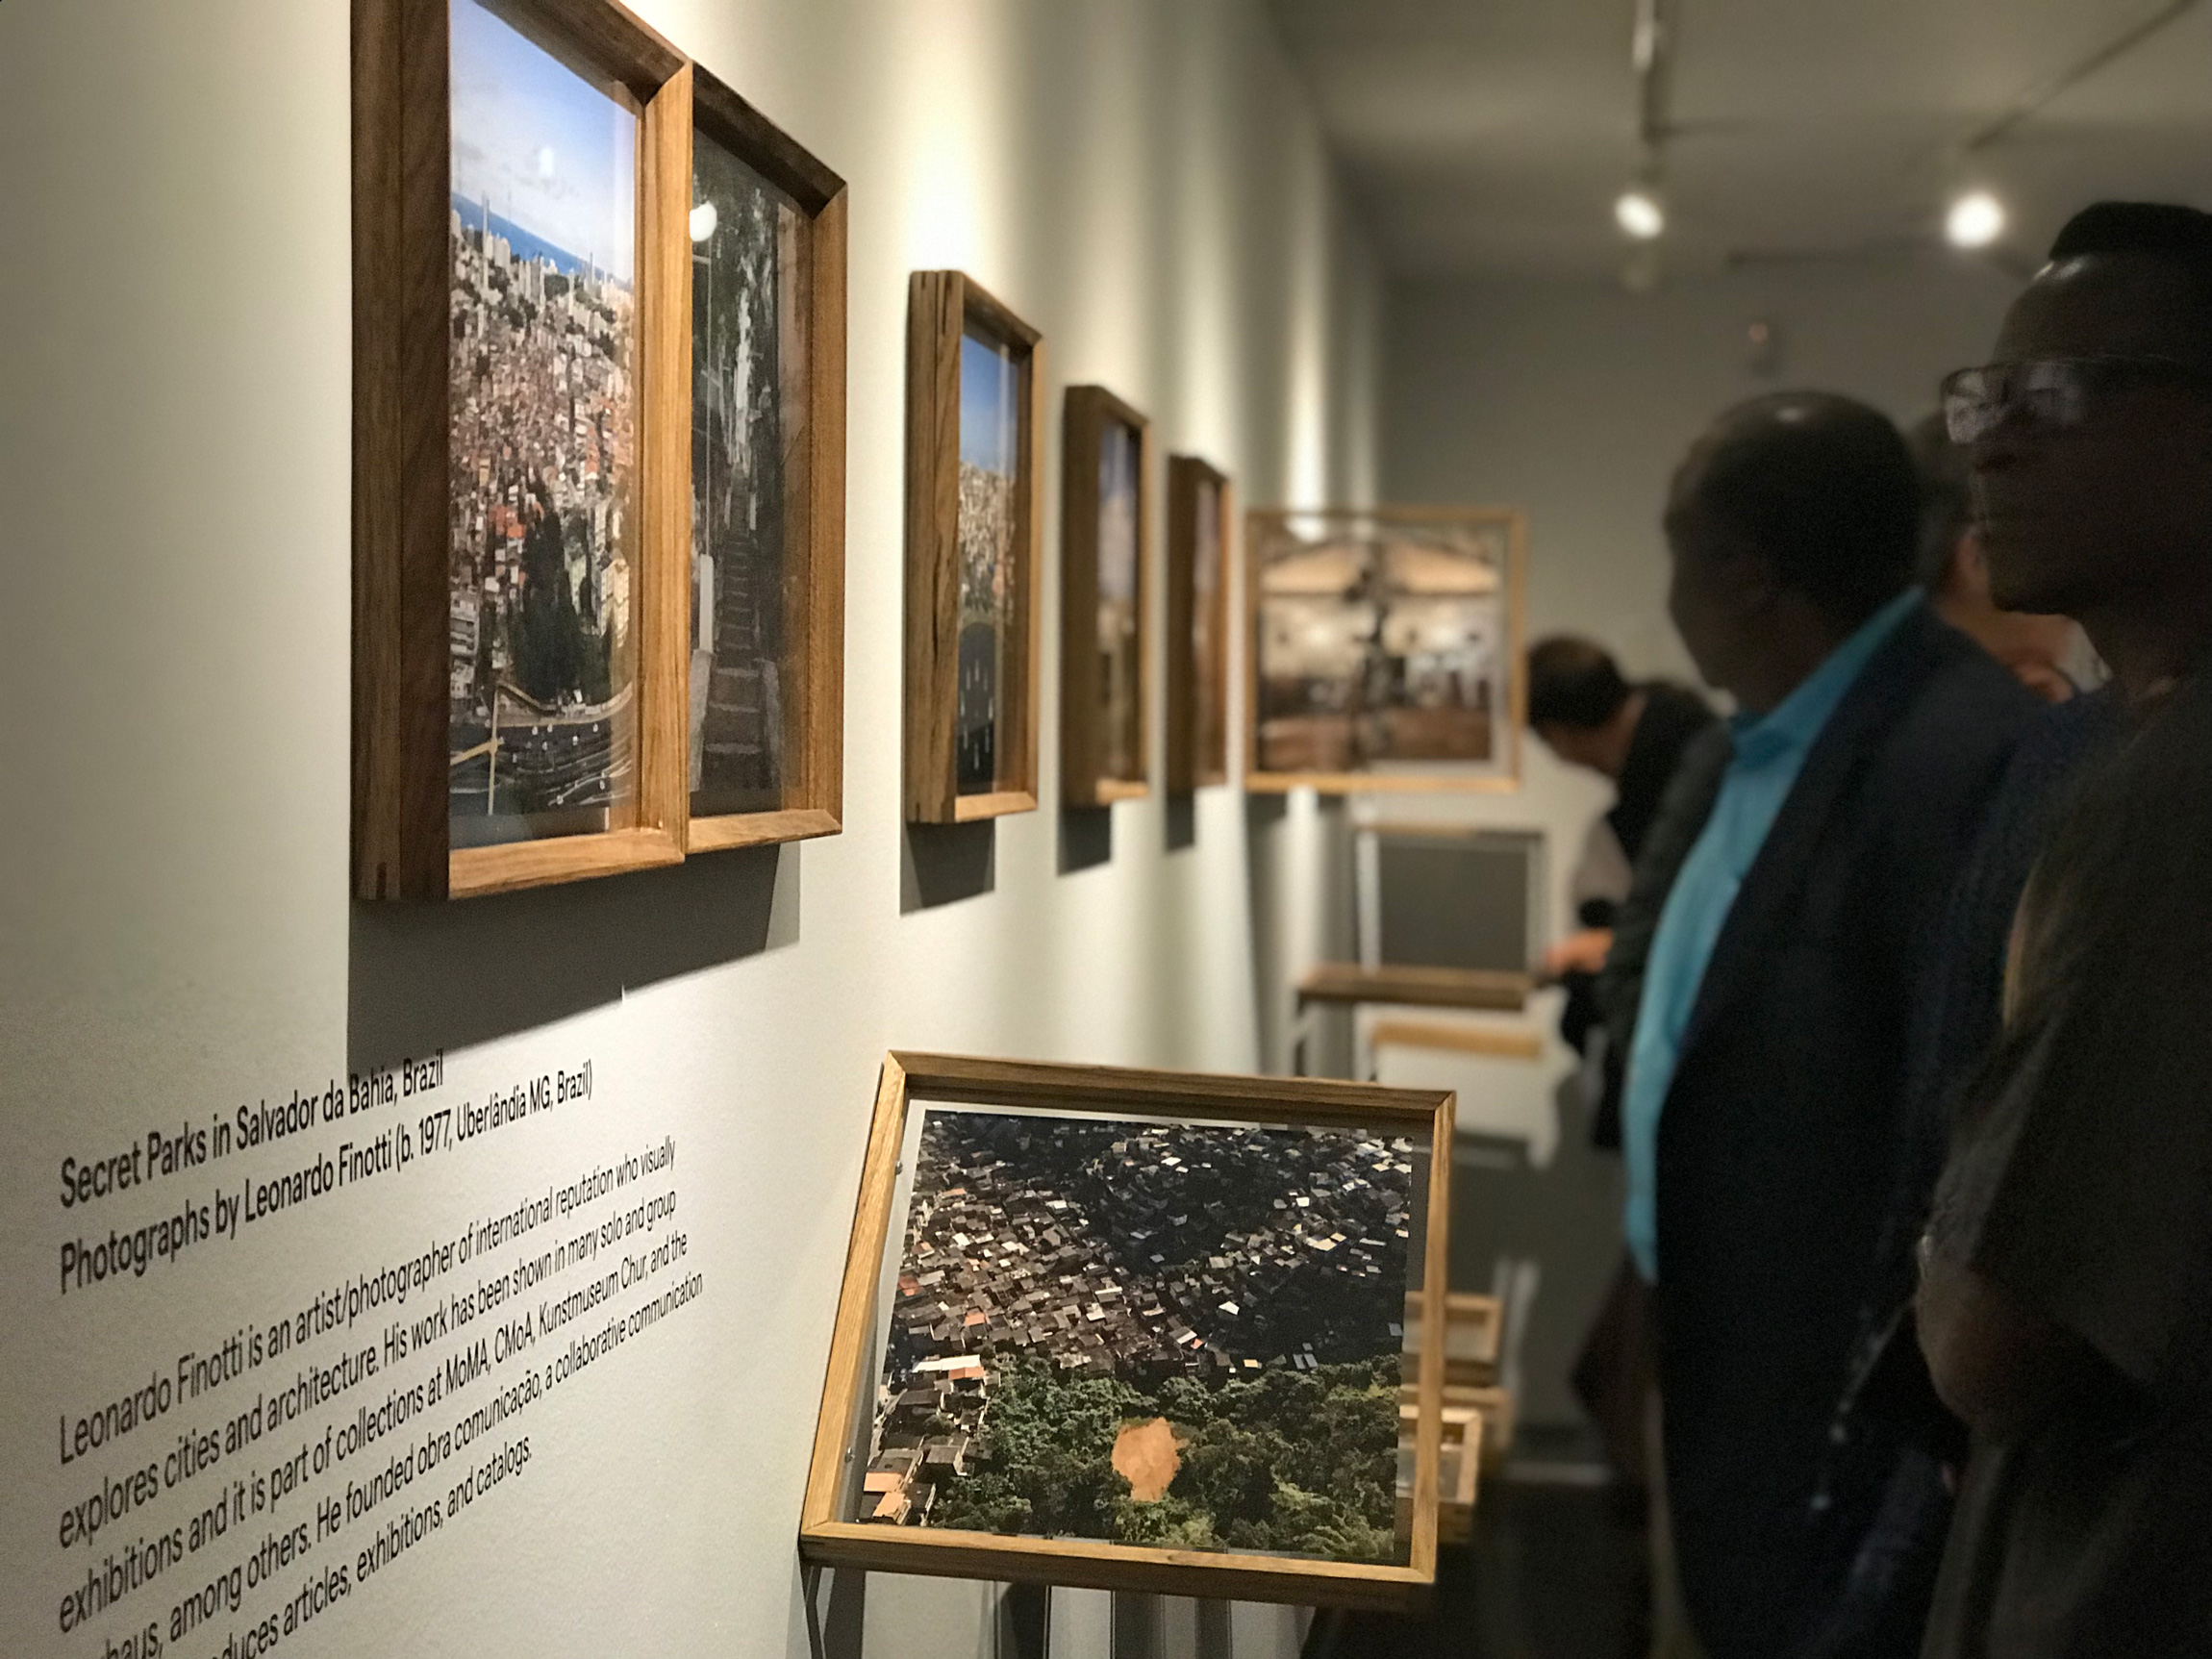 Exhibition on sacred landscapes at Hutchins Center for African & African American Research